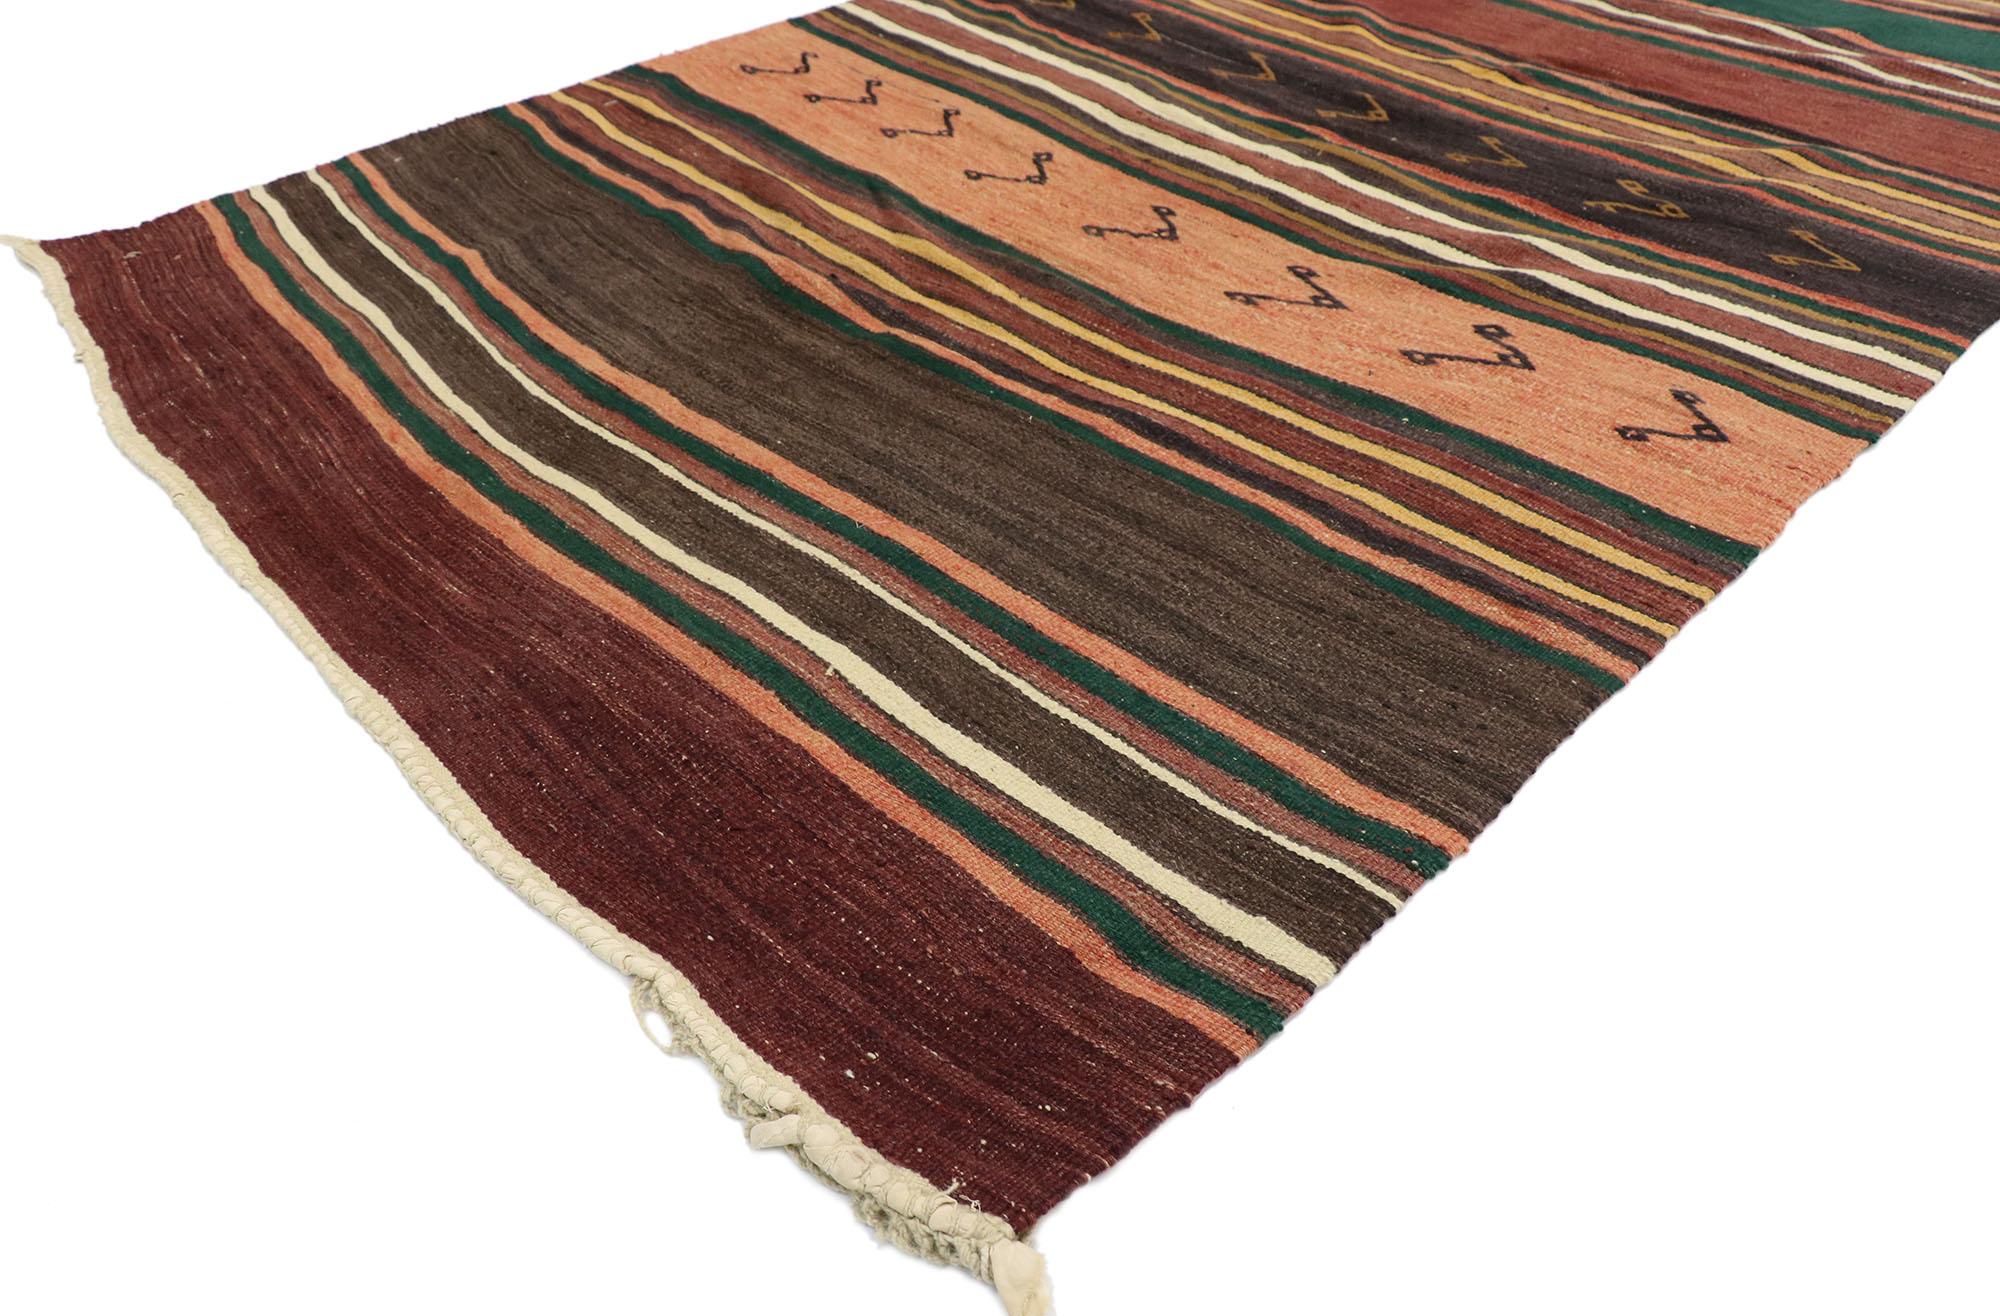 Hand-Woven Vintage Turkish Striped Kilim Gallery Rug with Modern Cabin Style